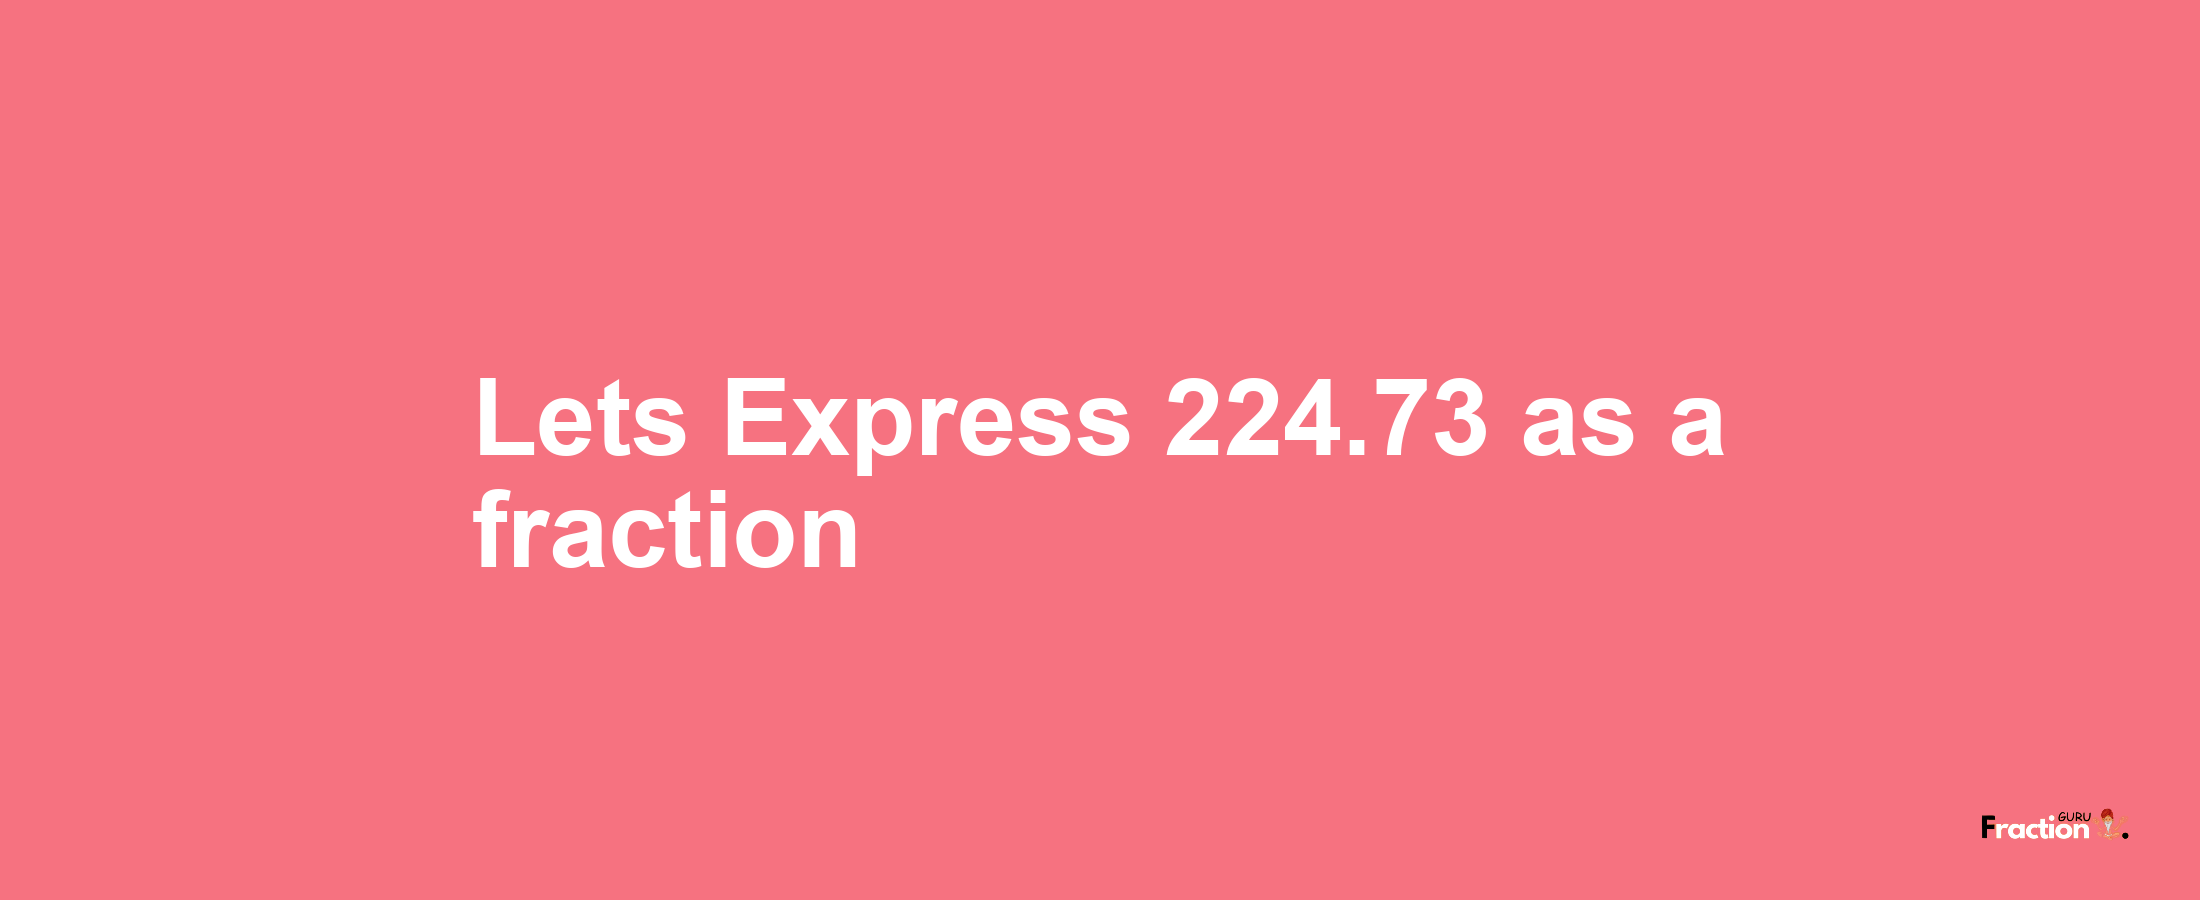 Lets Express 224.73 as afraction